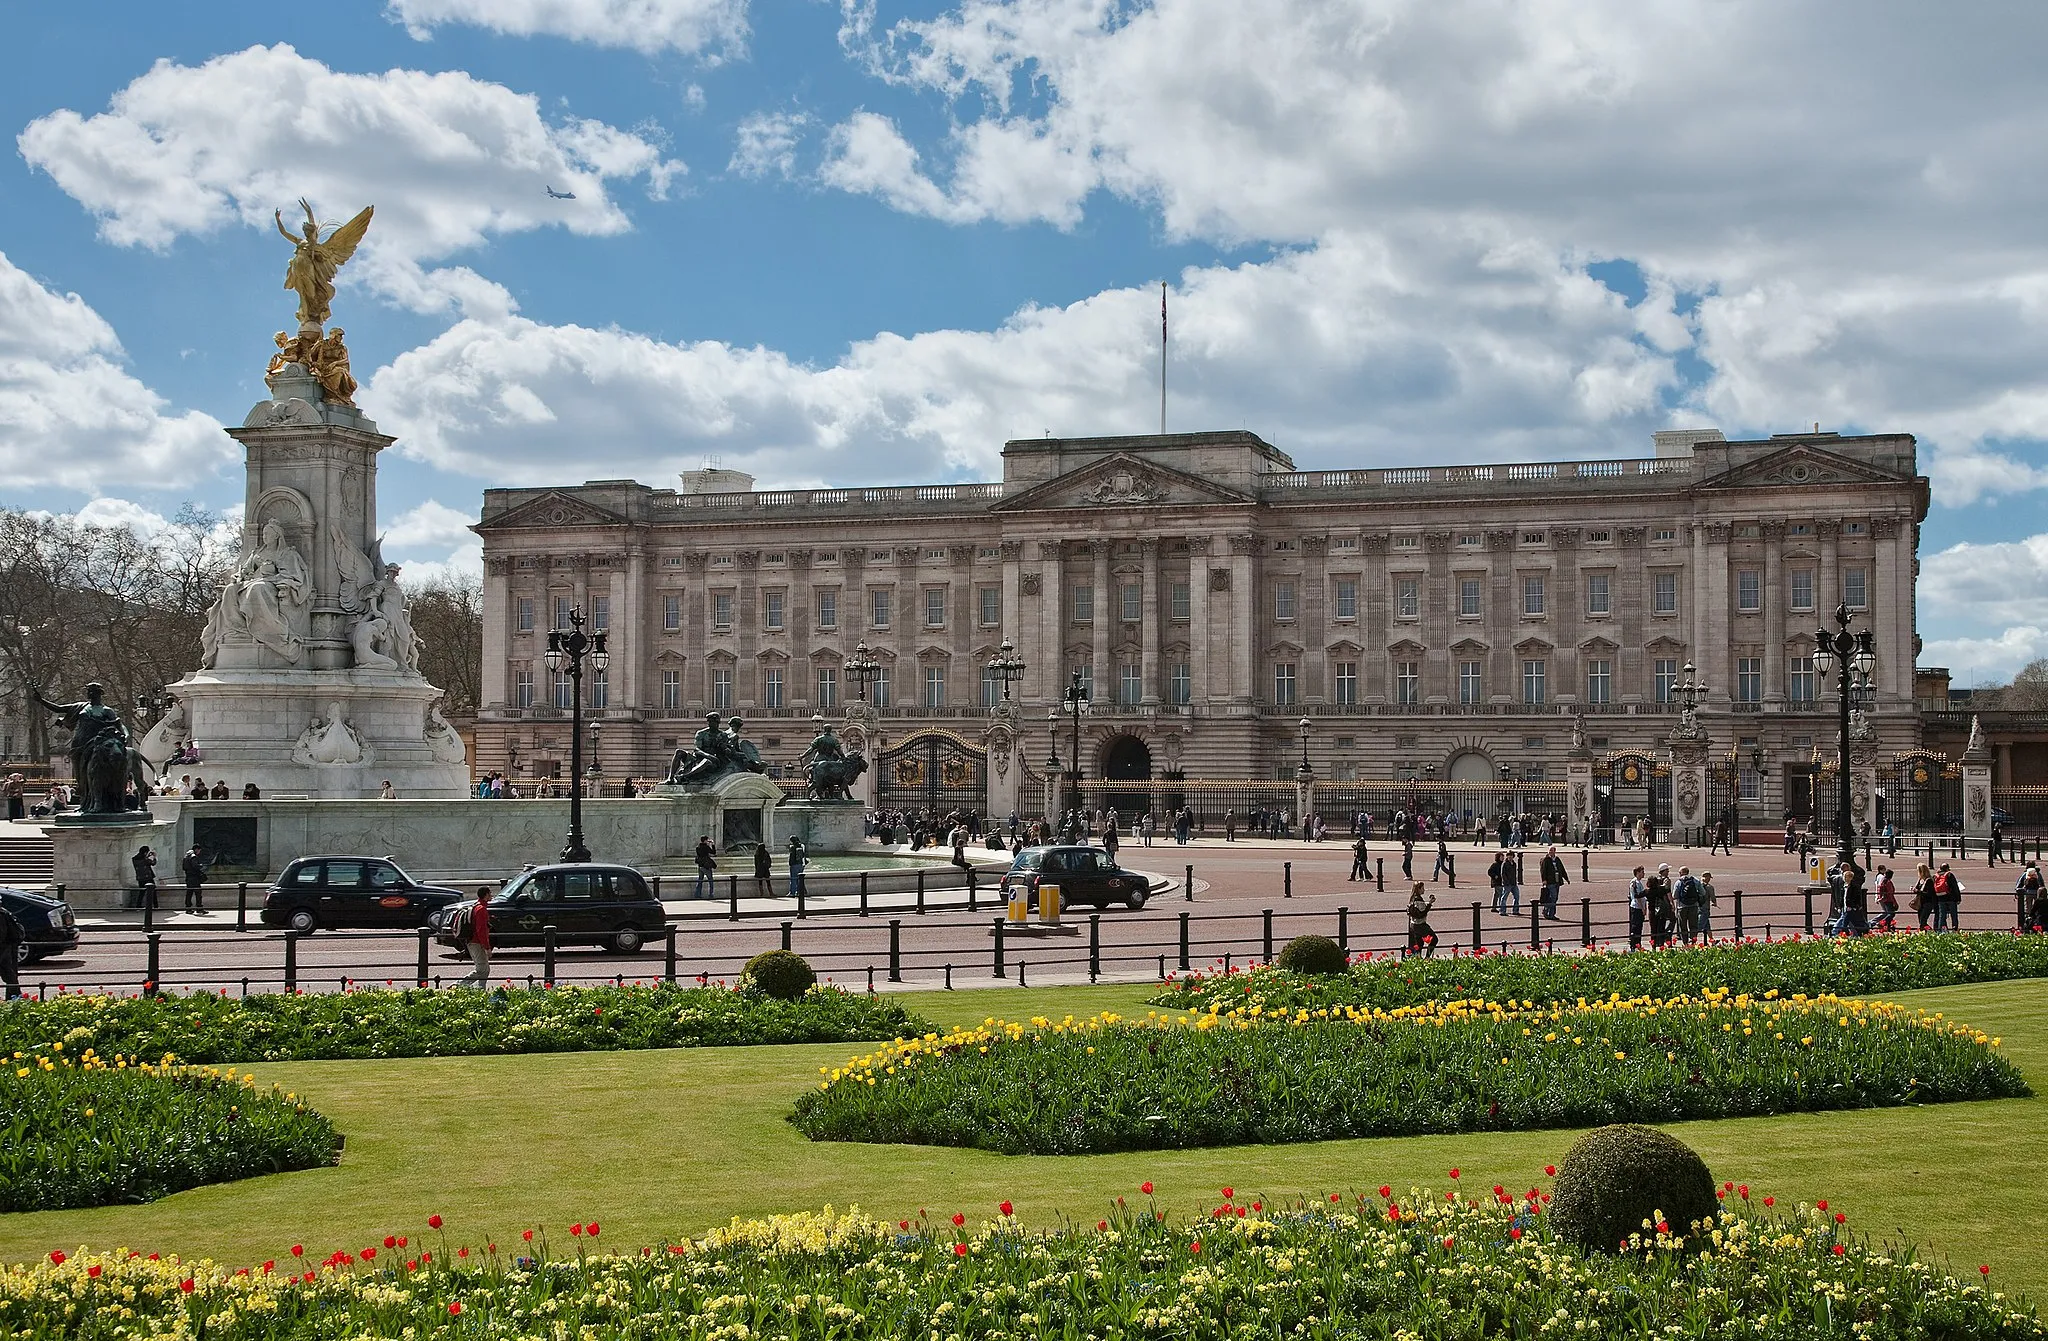 Photo showing: Buckingham Palace in London, England. taken by myself with a Canon 5D and 24-105mm f/4L IS lens.